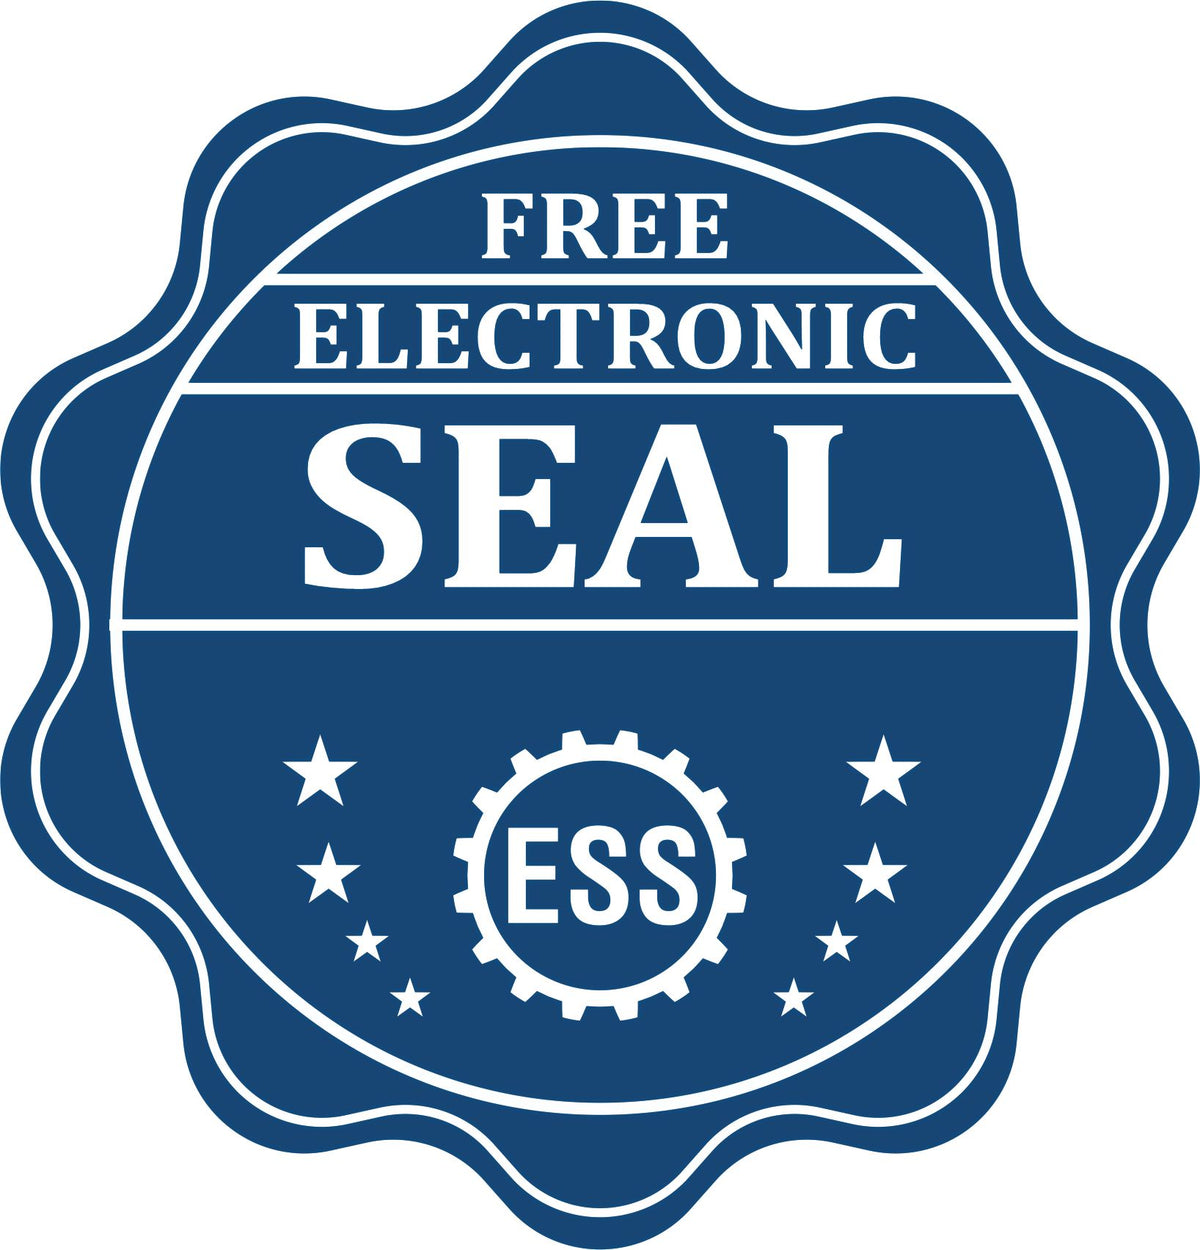 A badge showing a free electronic seal for the Gift Tennessee Landscape Architect Seal with stars and the ESS gear on the emblem.